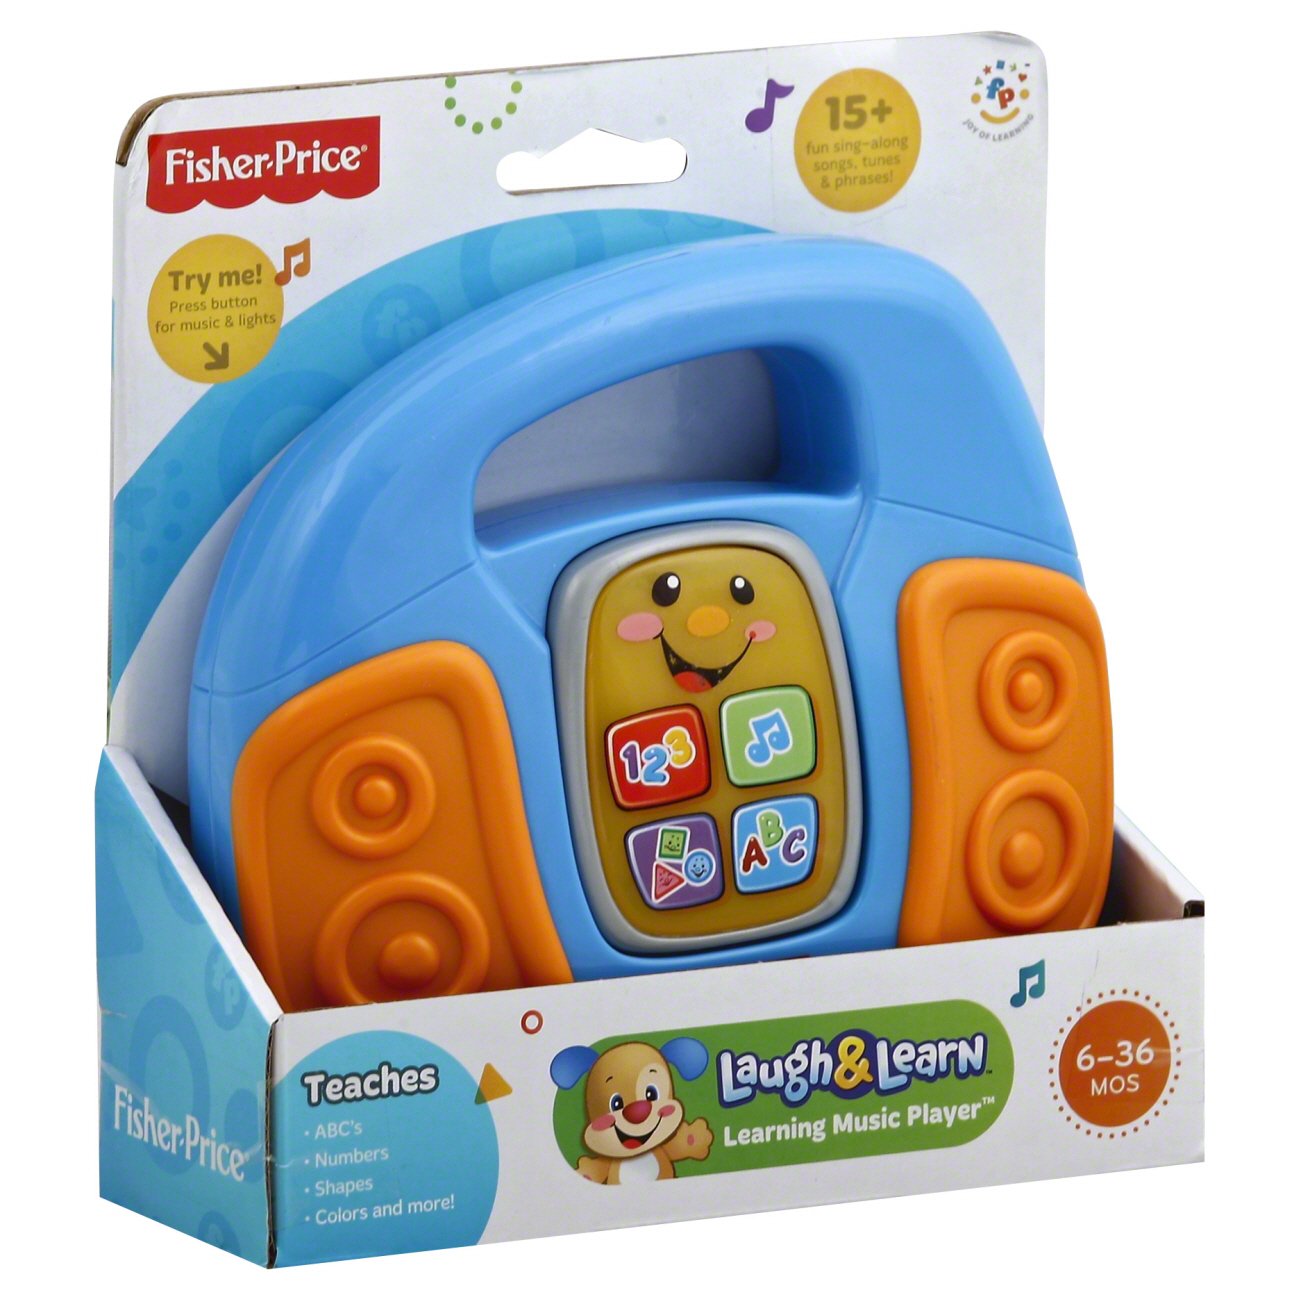 fisher price shop and learn